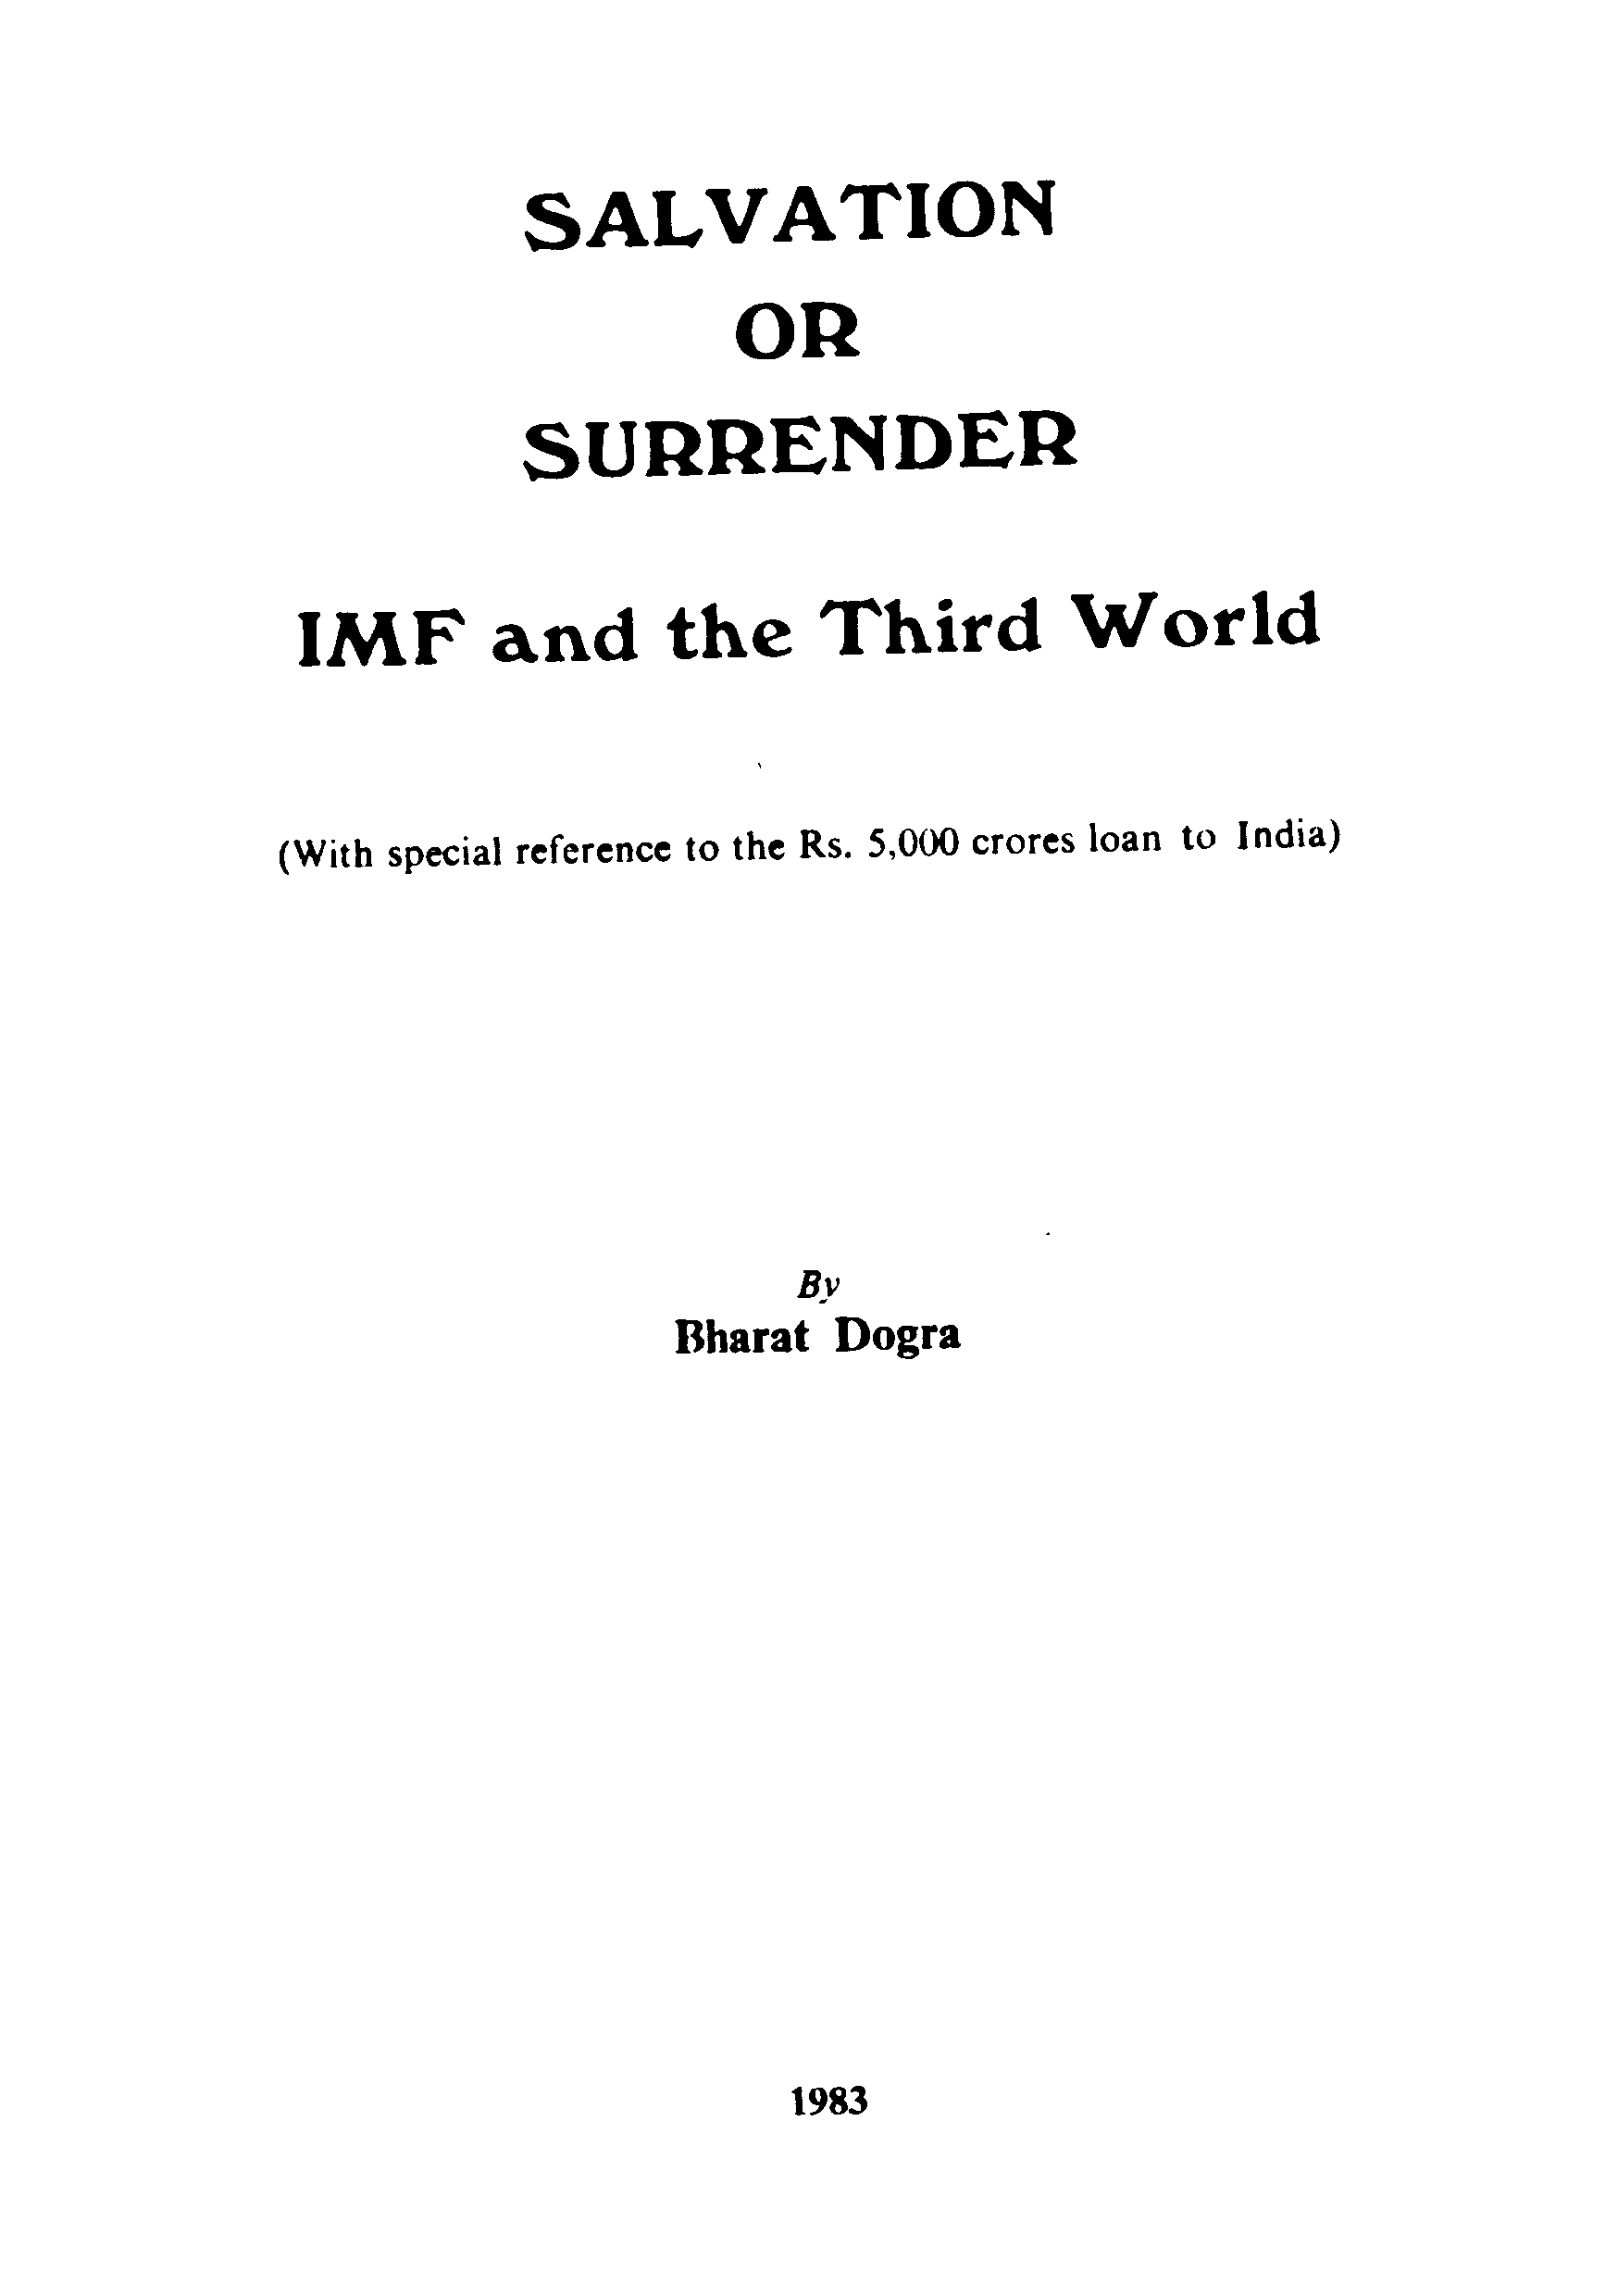 Salvation or surrender IMF and the third world